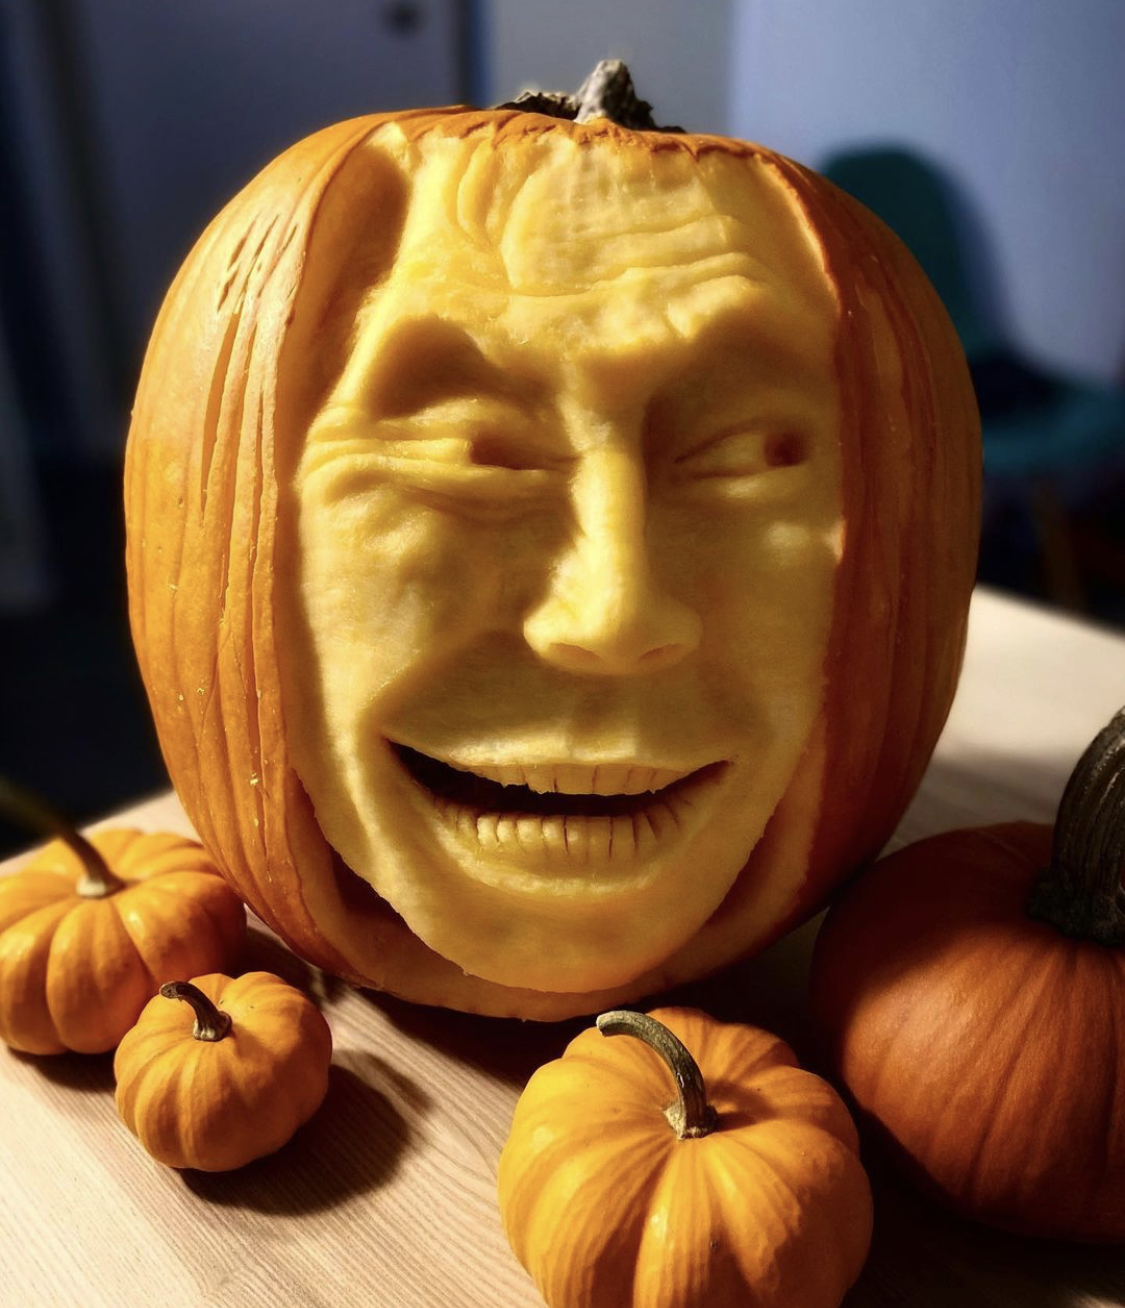 The first-place prize was awarded to the winning pumpkin carved by Julia Pinto, second-year animation student.